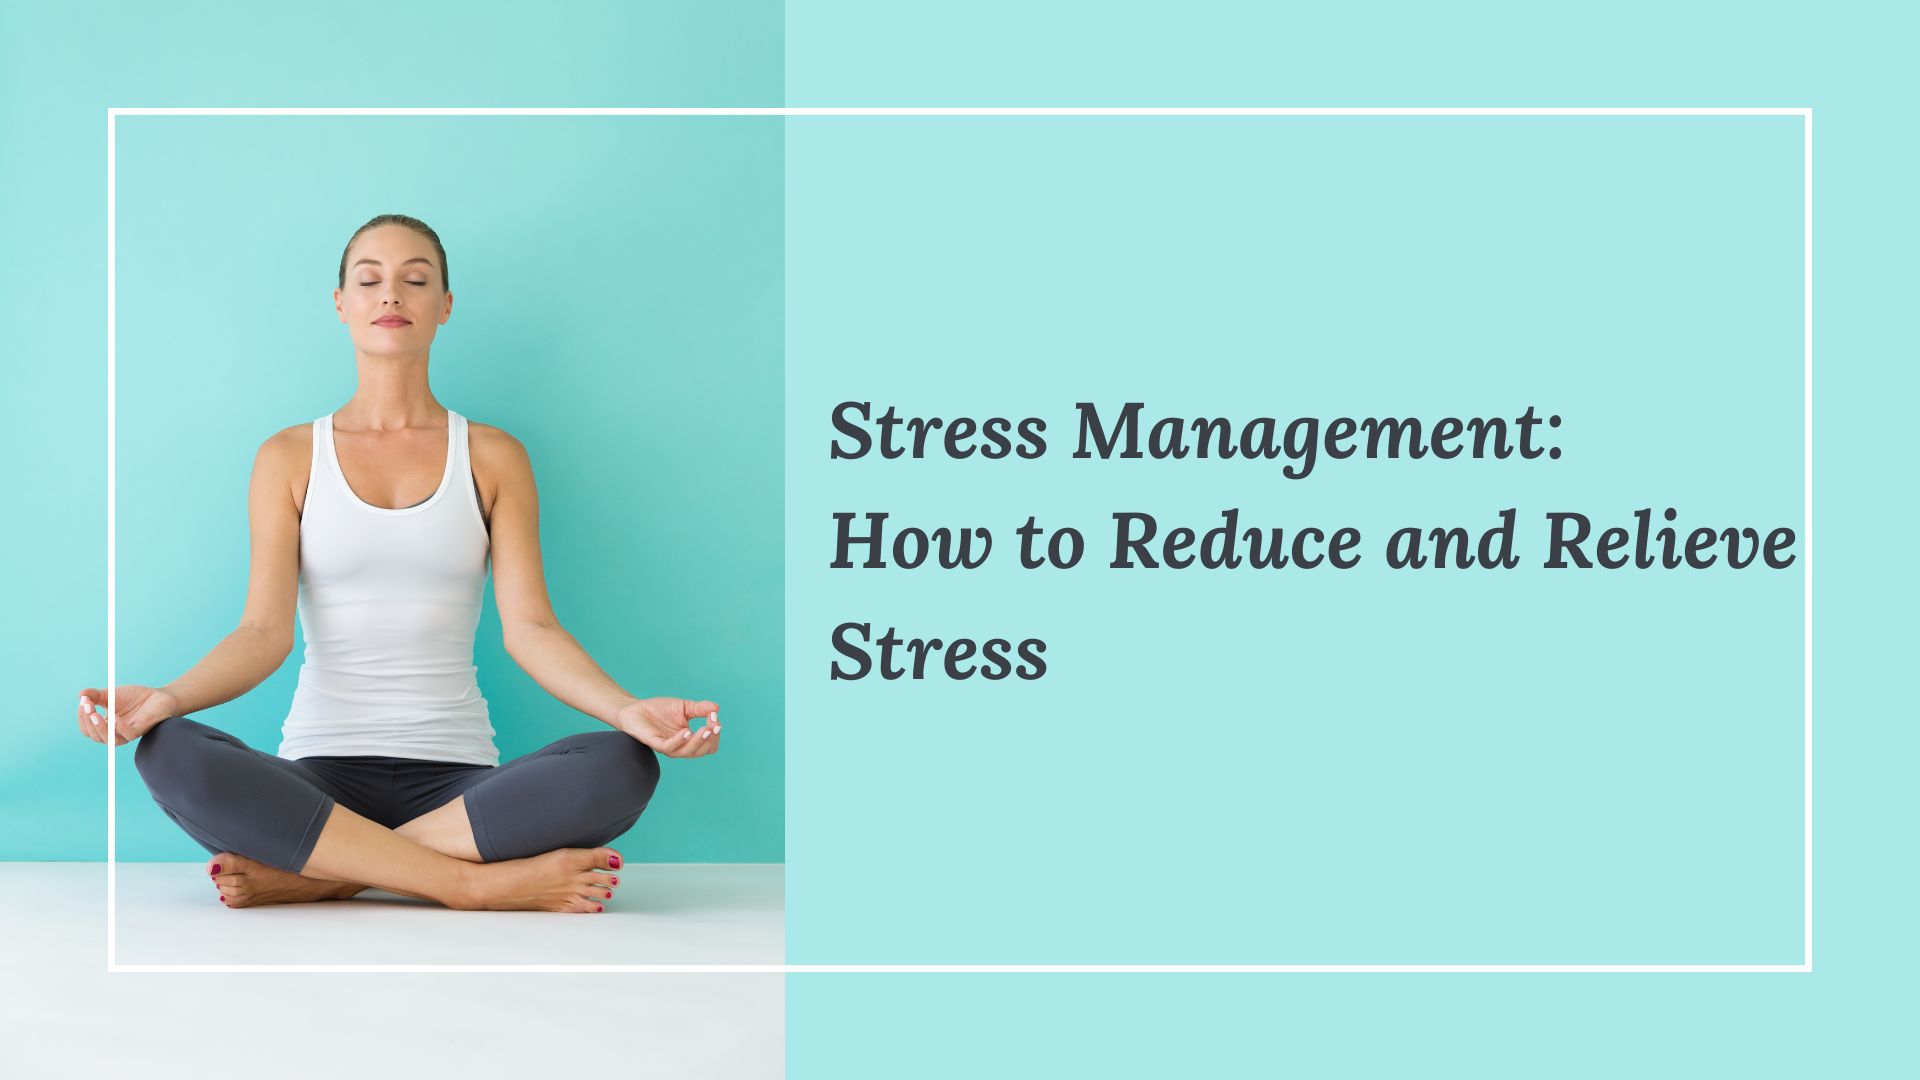 Stress Management: How to Reduce and Relieve Stress